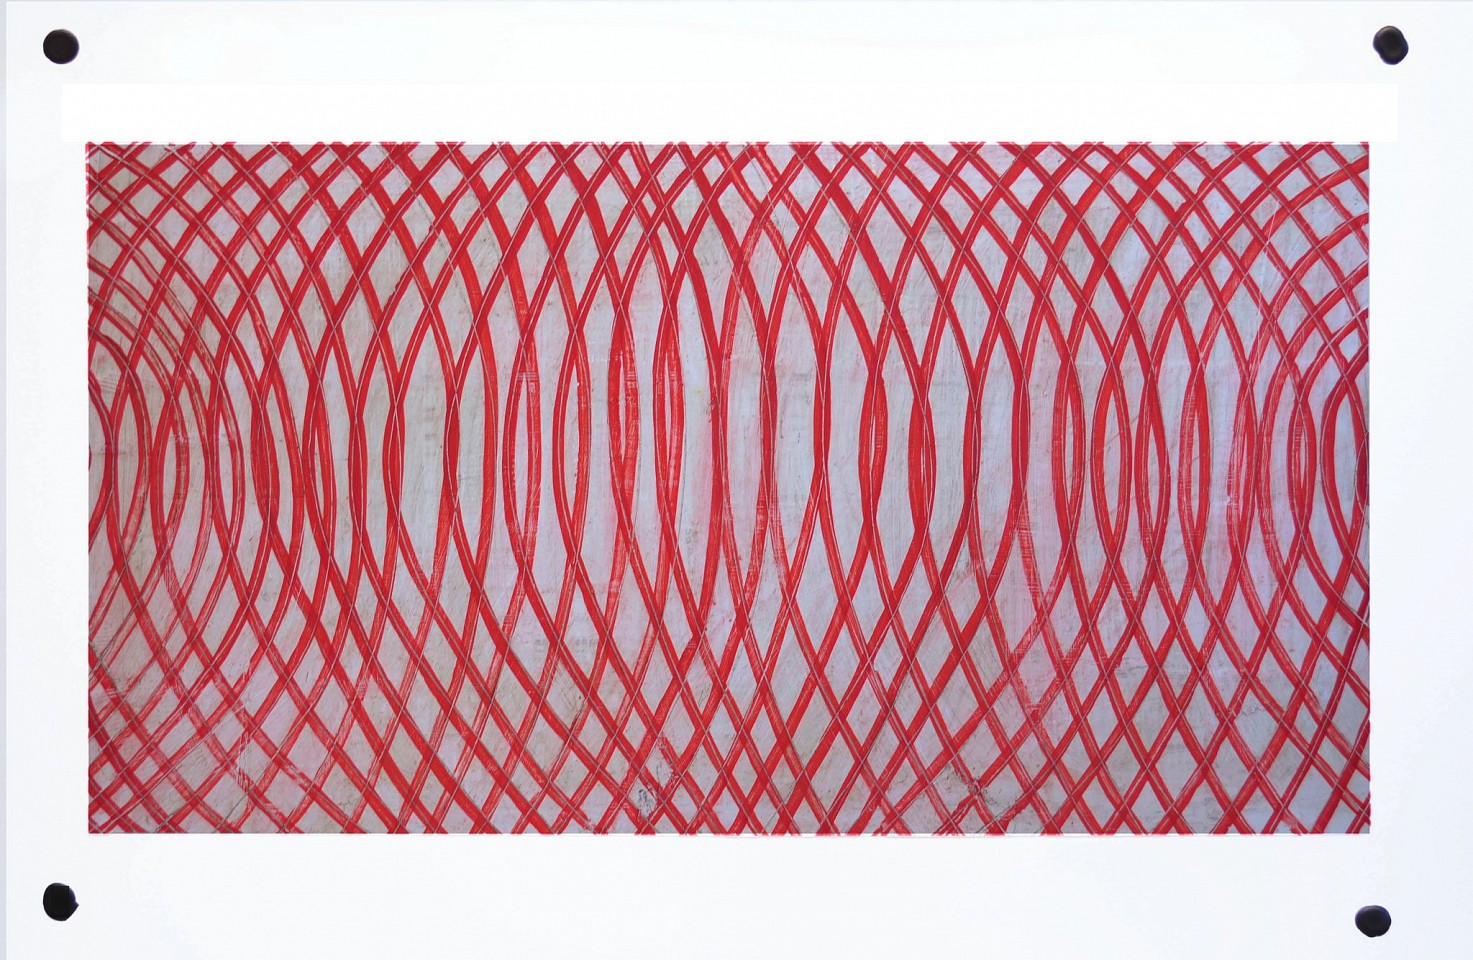 Don Maynard
Mapping Curved Lines, 2016
MAY381
encaustic, 26 x 40 inch paper / 15 x 28 inch image